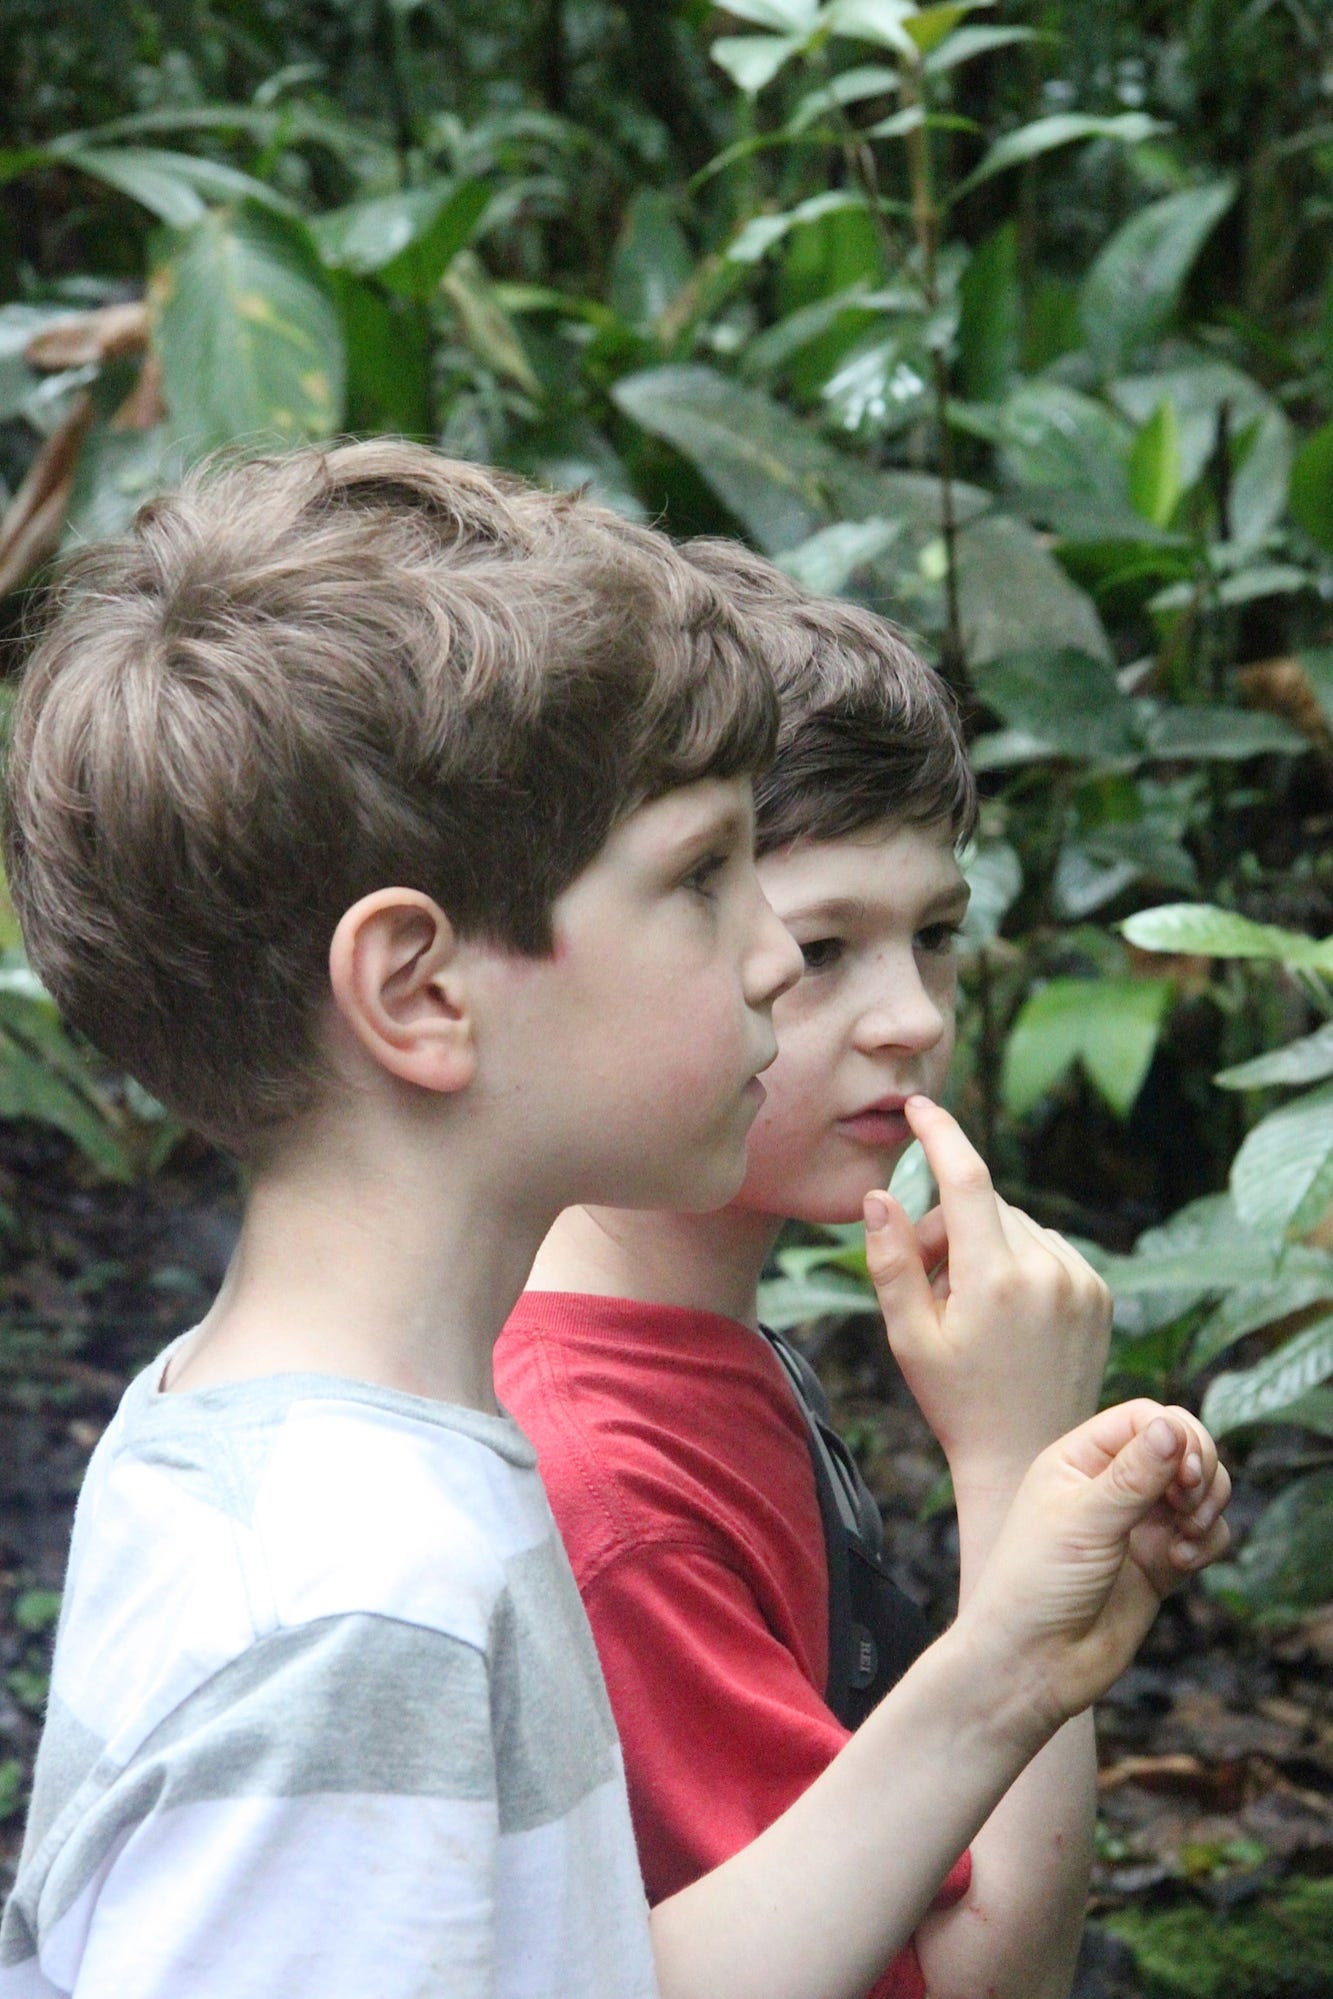 Toby & Zack Weinstein (then 7 & 9 years old), in the Amazon, tasting lemon ants.